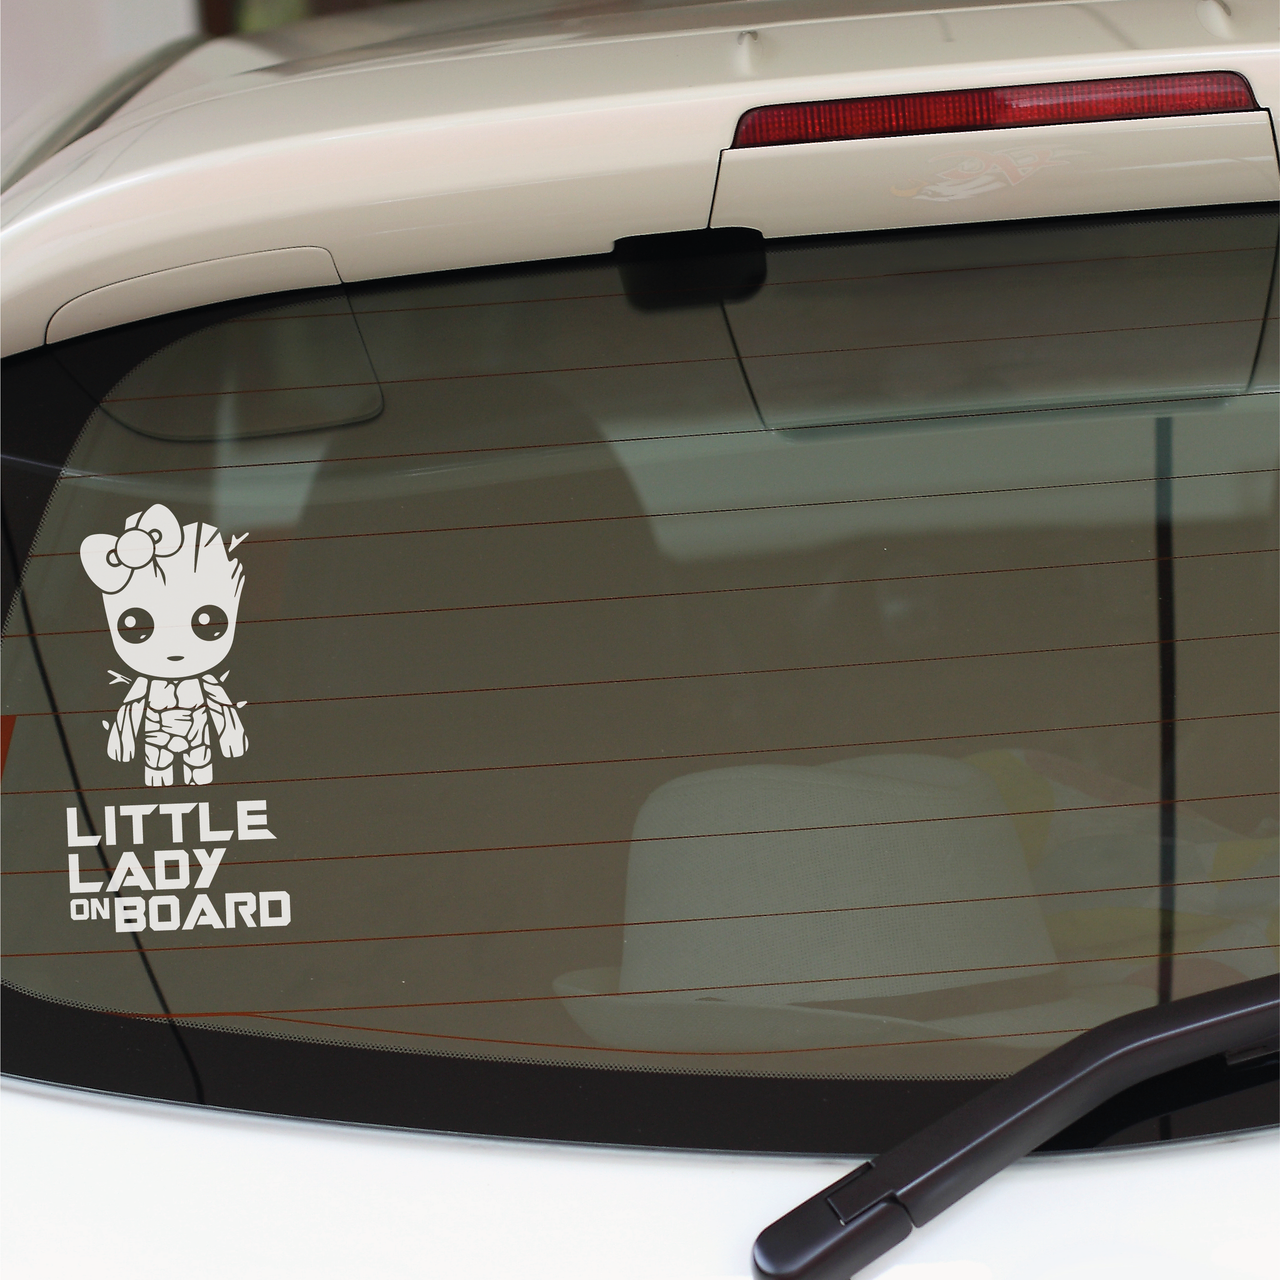 Little Lady On Board - Baby Groot Car Decal - Type 2